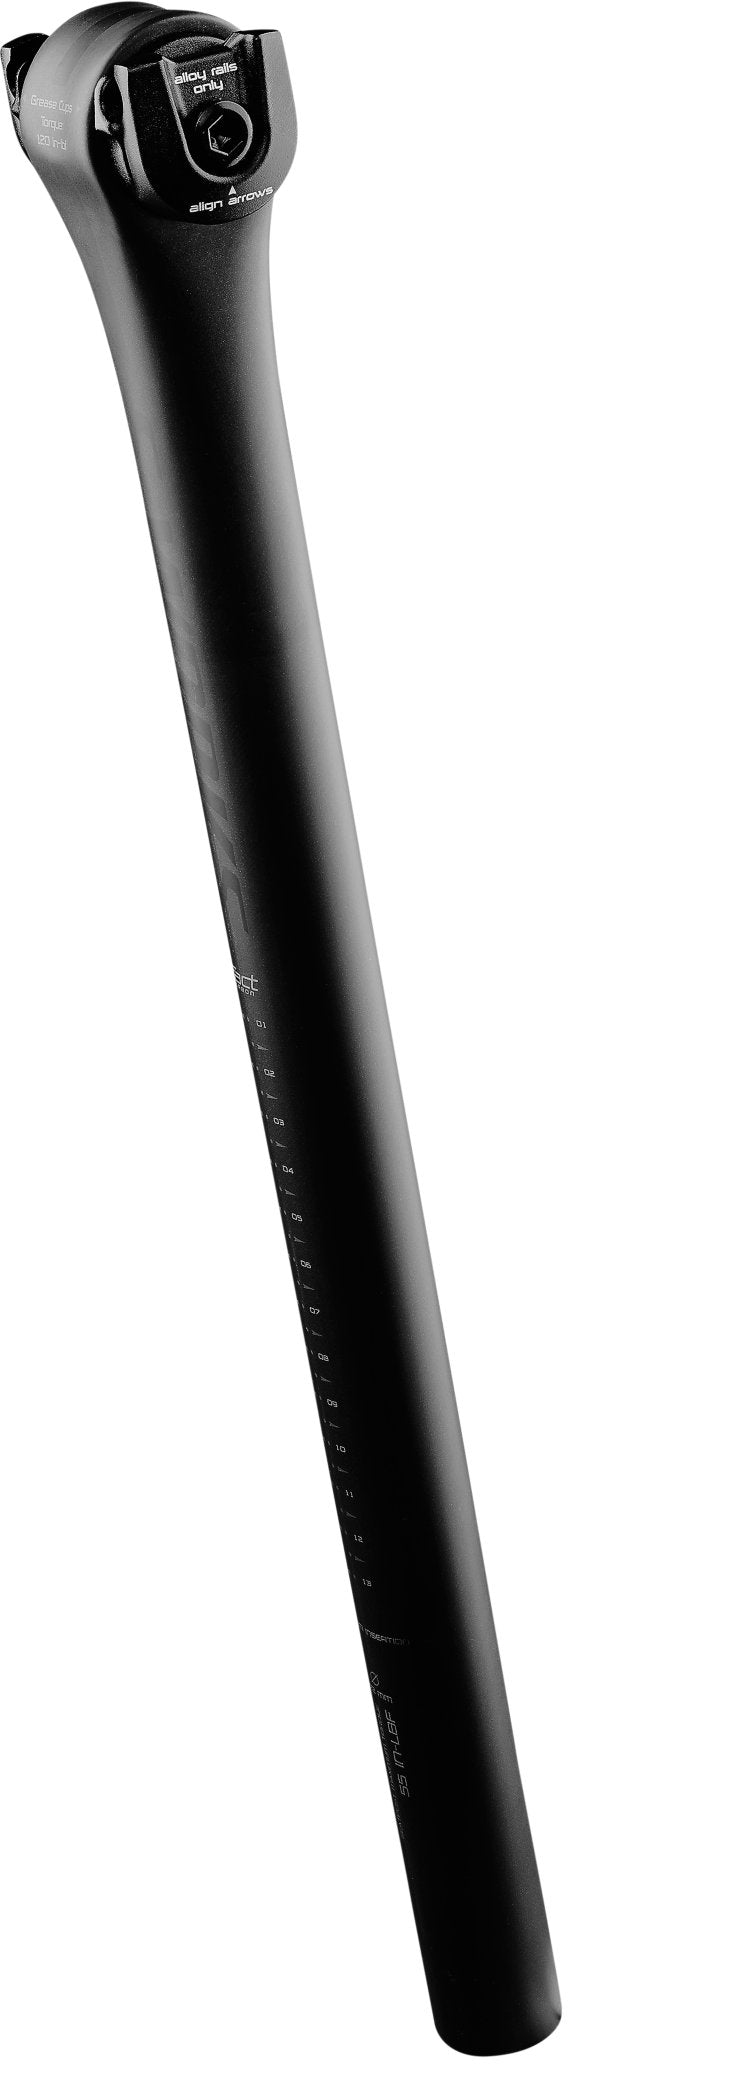 Specialized S-Works Carbon Bicycle Seatpost